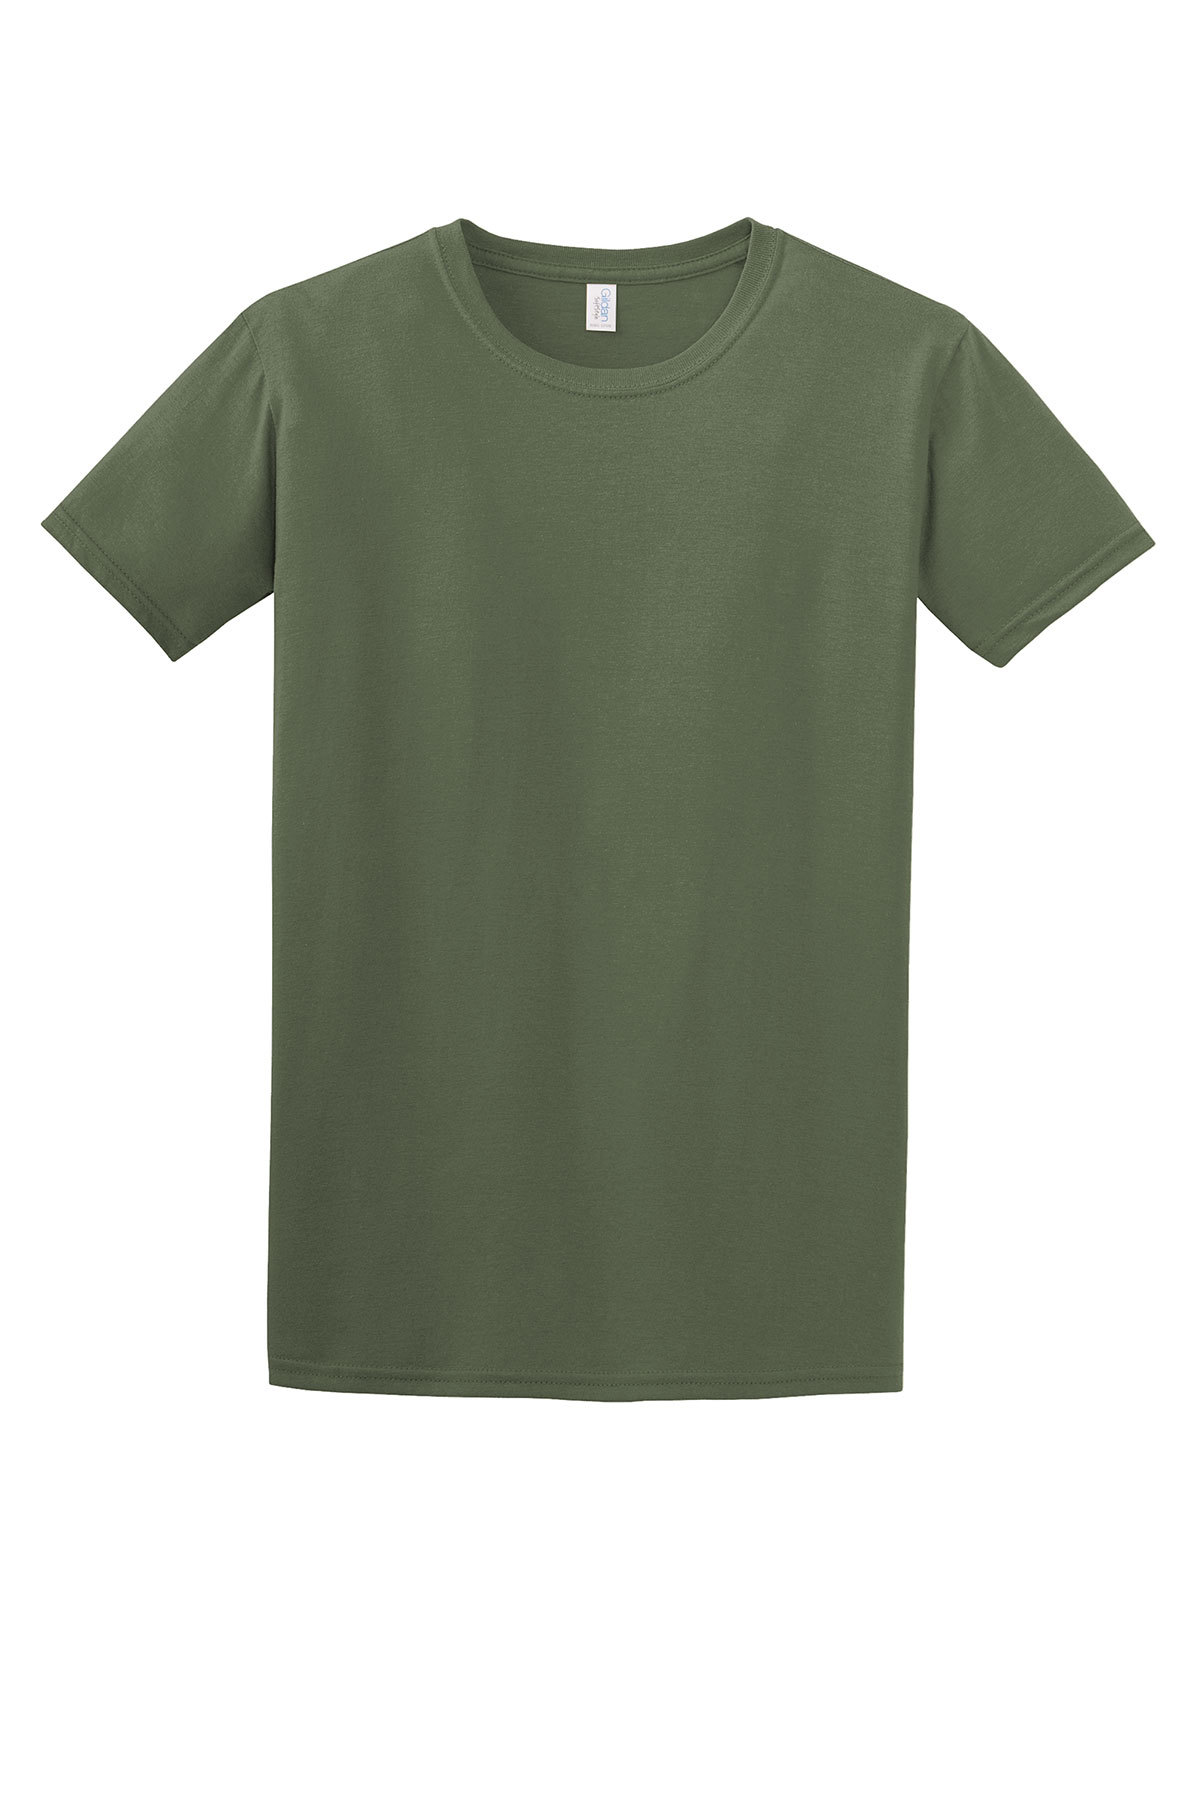 Campinglife Tshirt   Color Heather Green